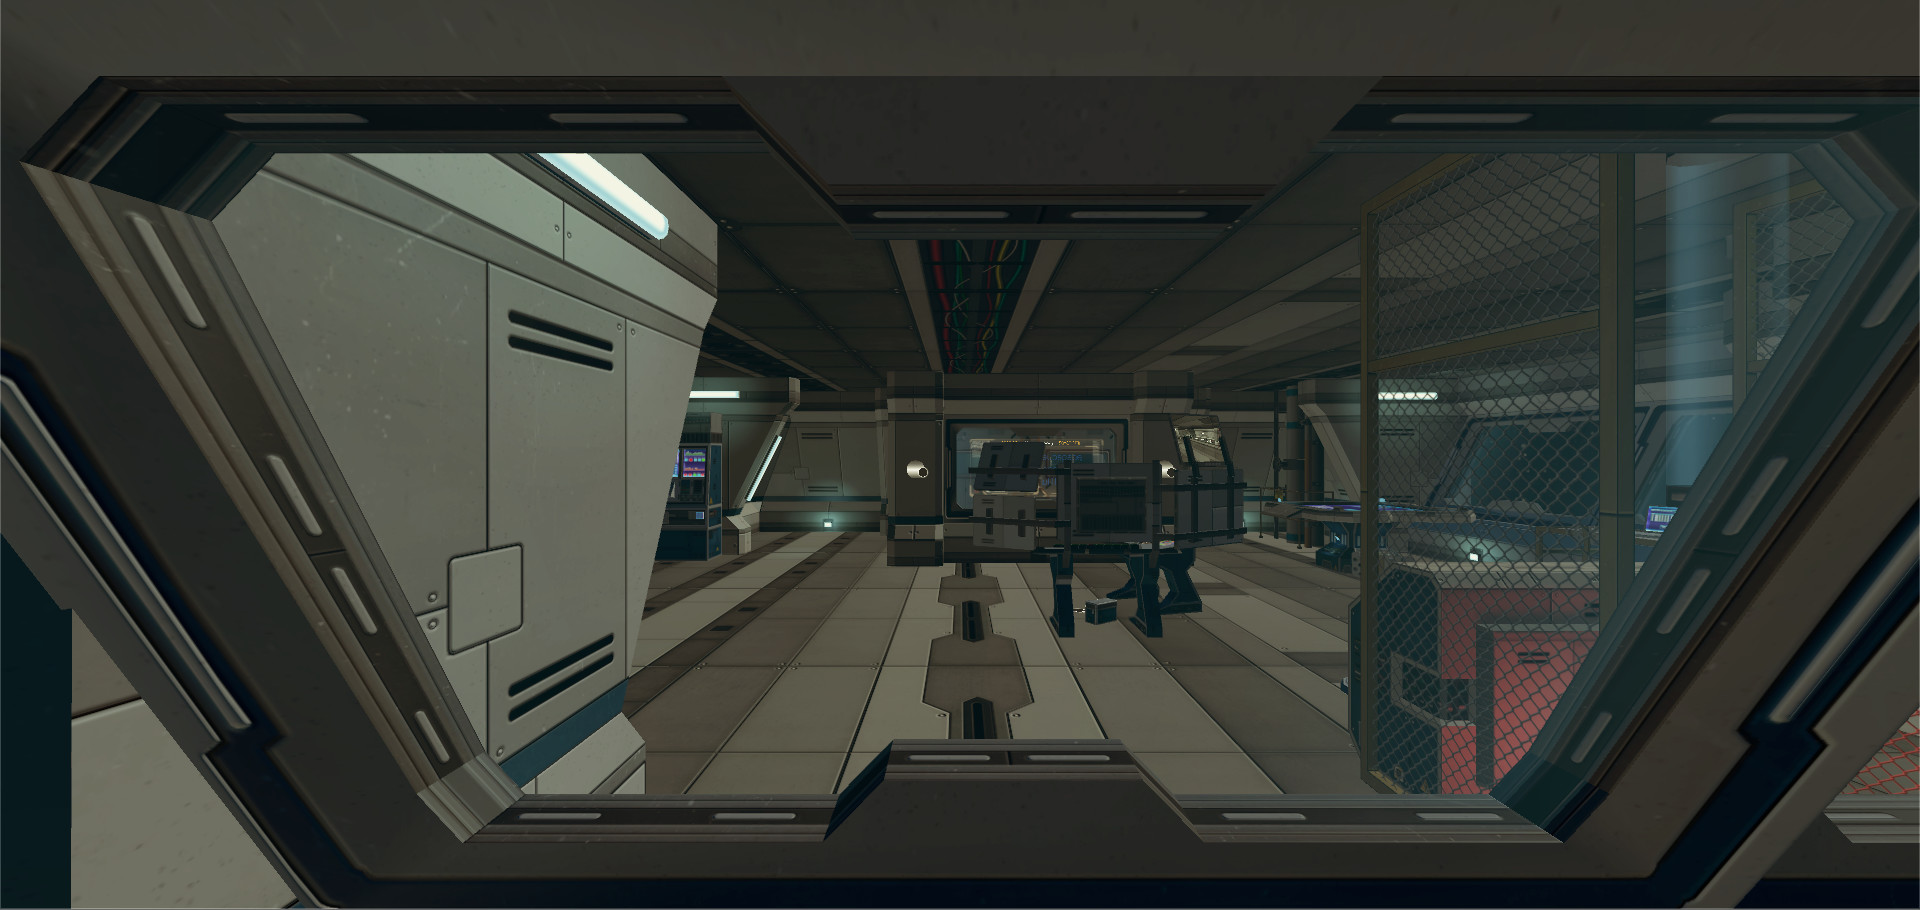 Space Station Loma: OPERATIONS screenshot